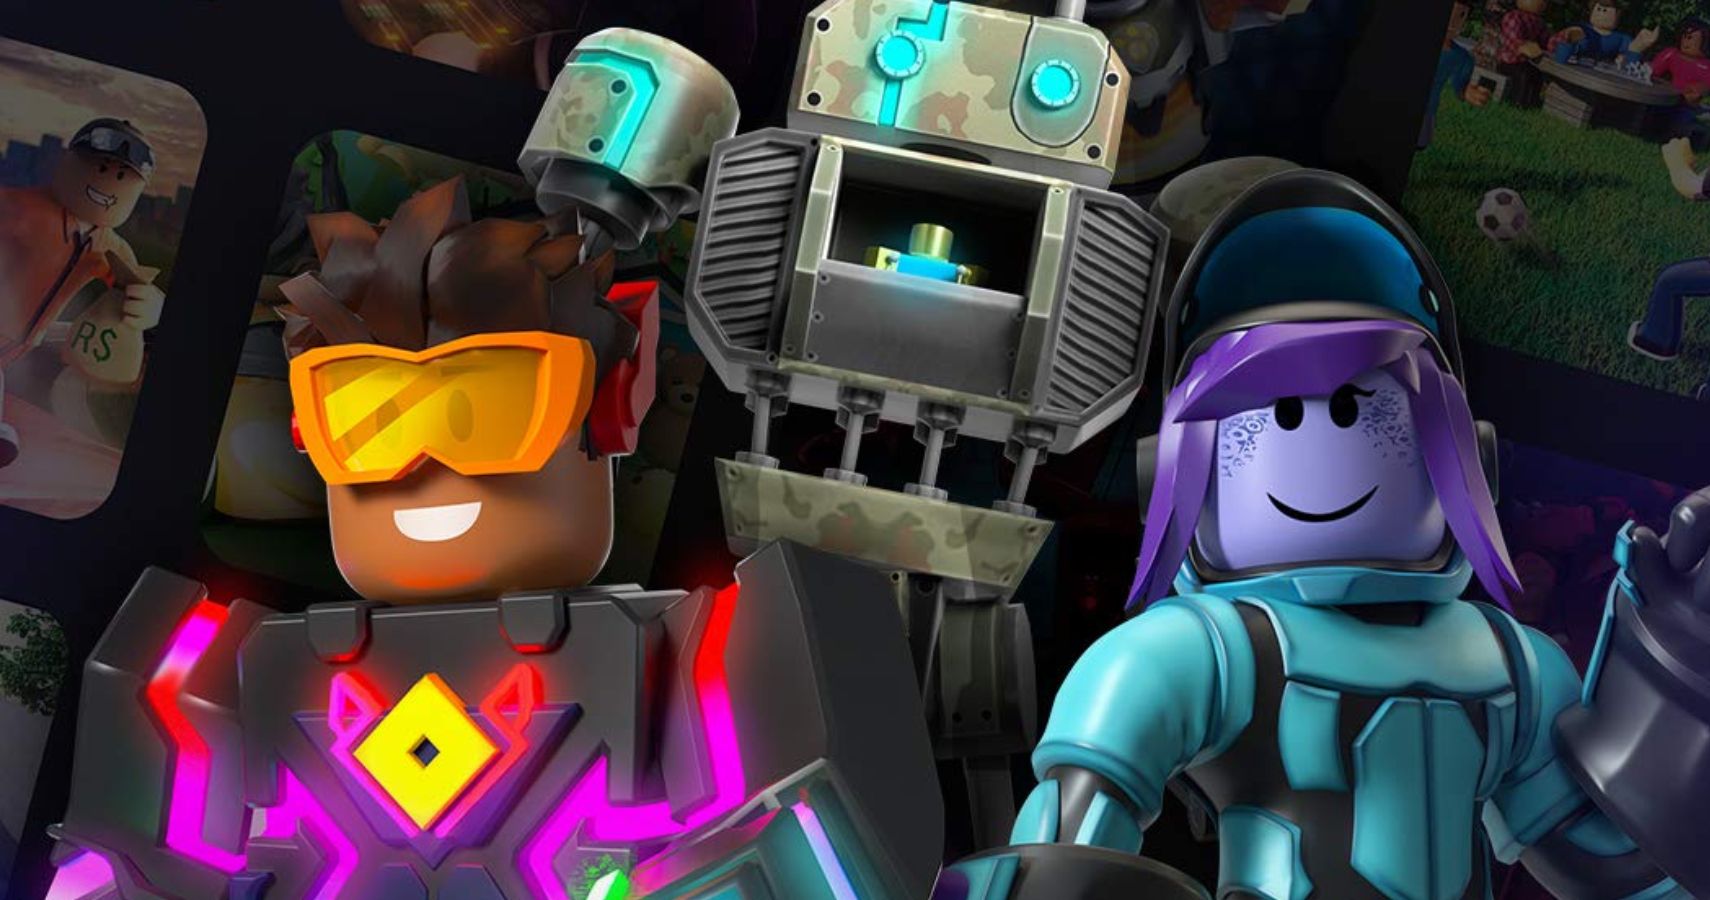 Prime Gaming S First New Benefit Is Exclusive Roblox Content - 2016 november robot dog code roblox